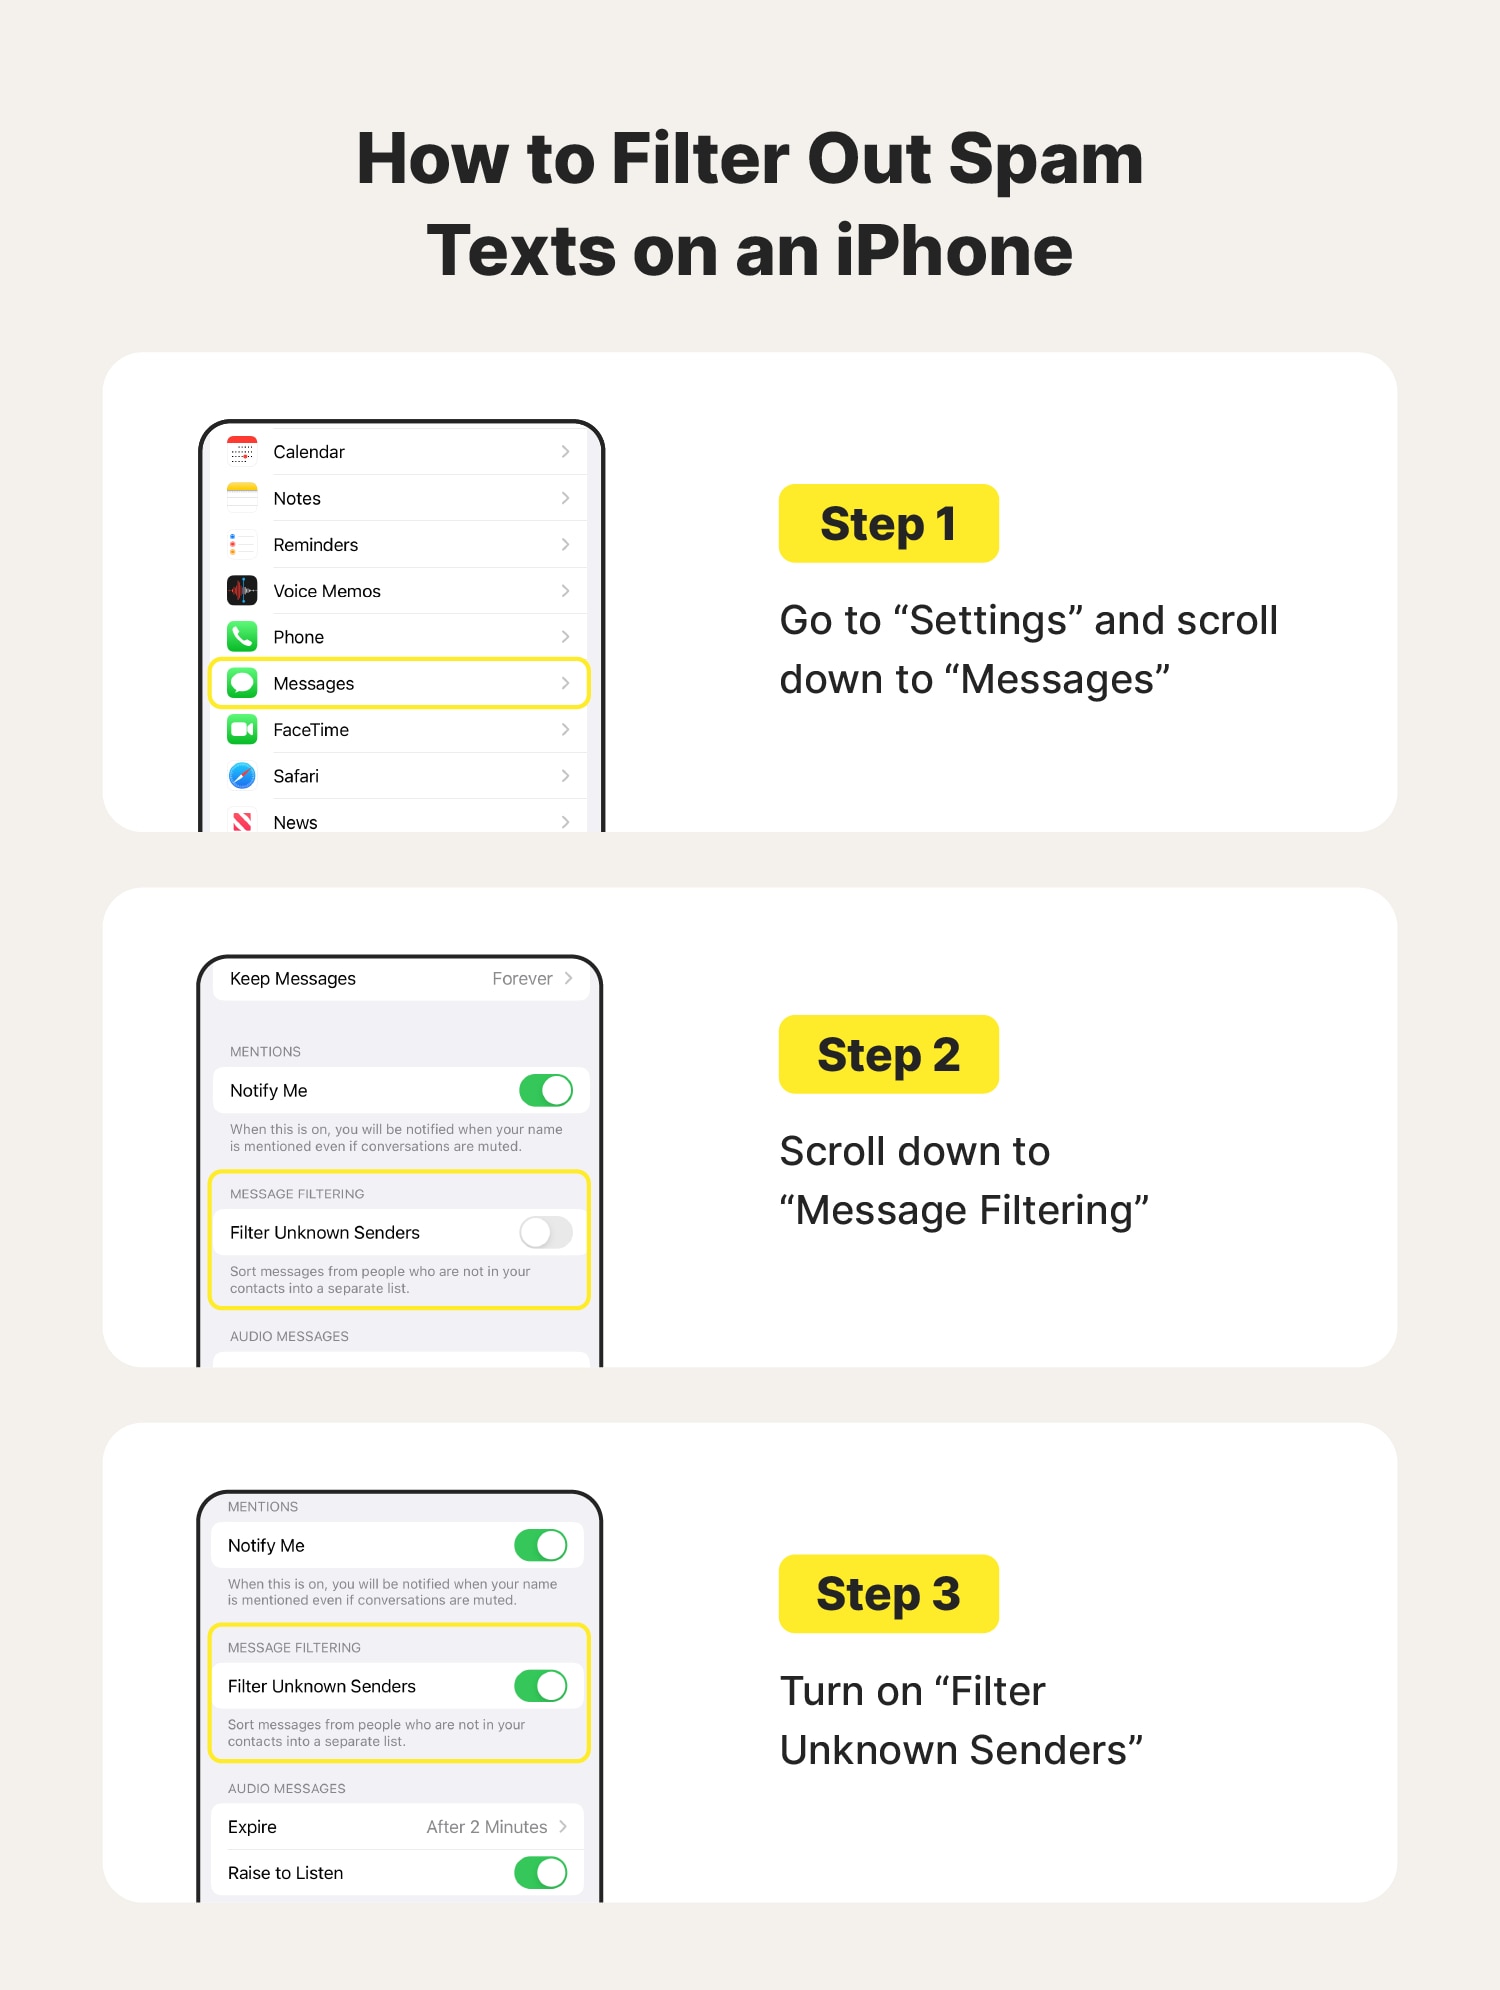 Step-by-step visual instructions on how to filter spam texts on an iPhone.